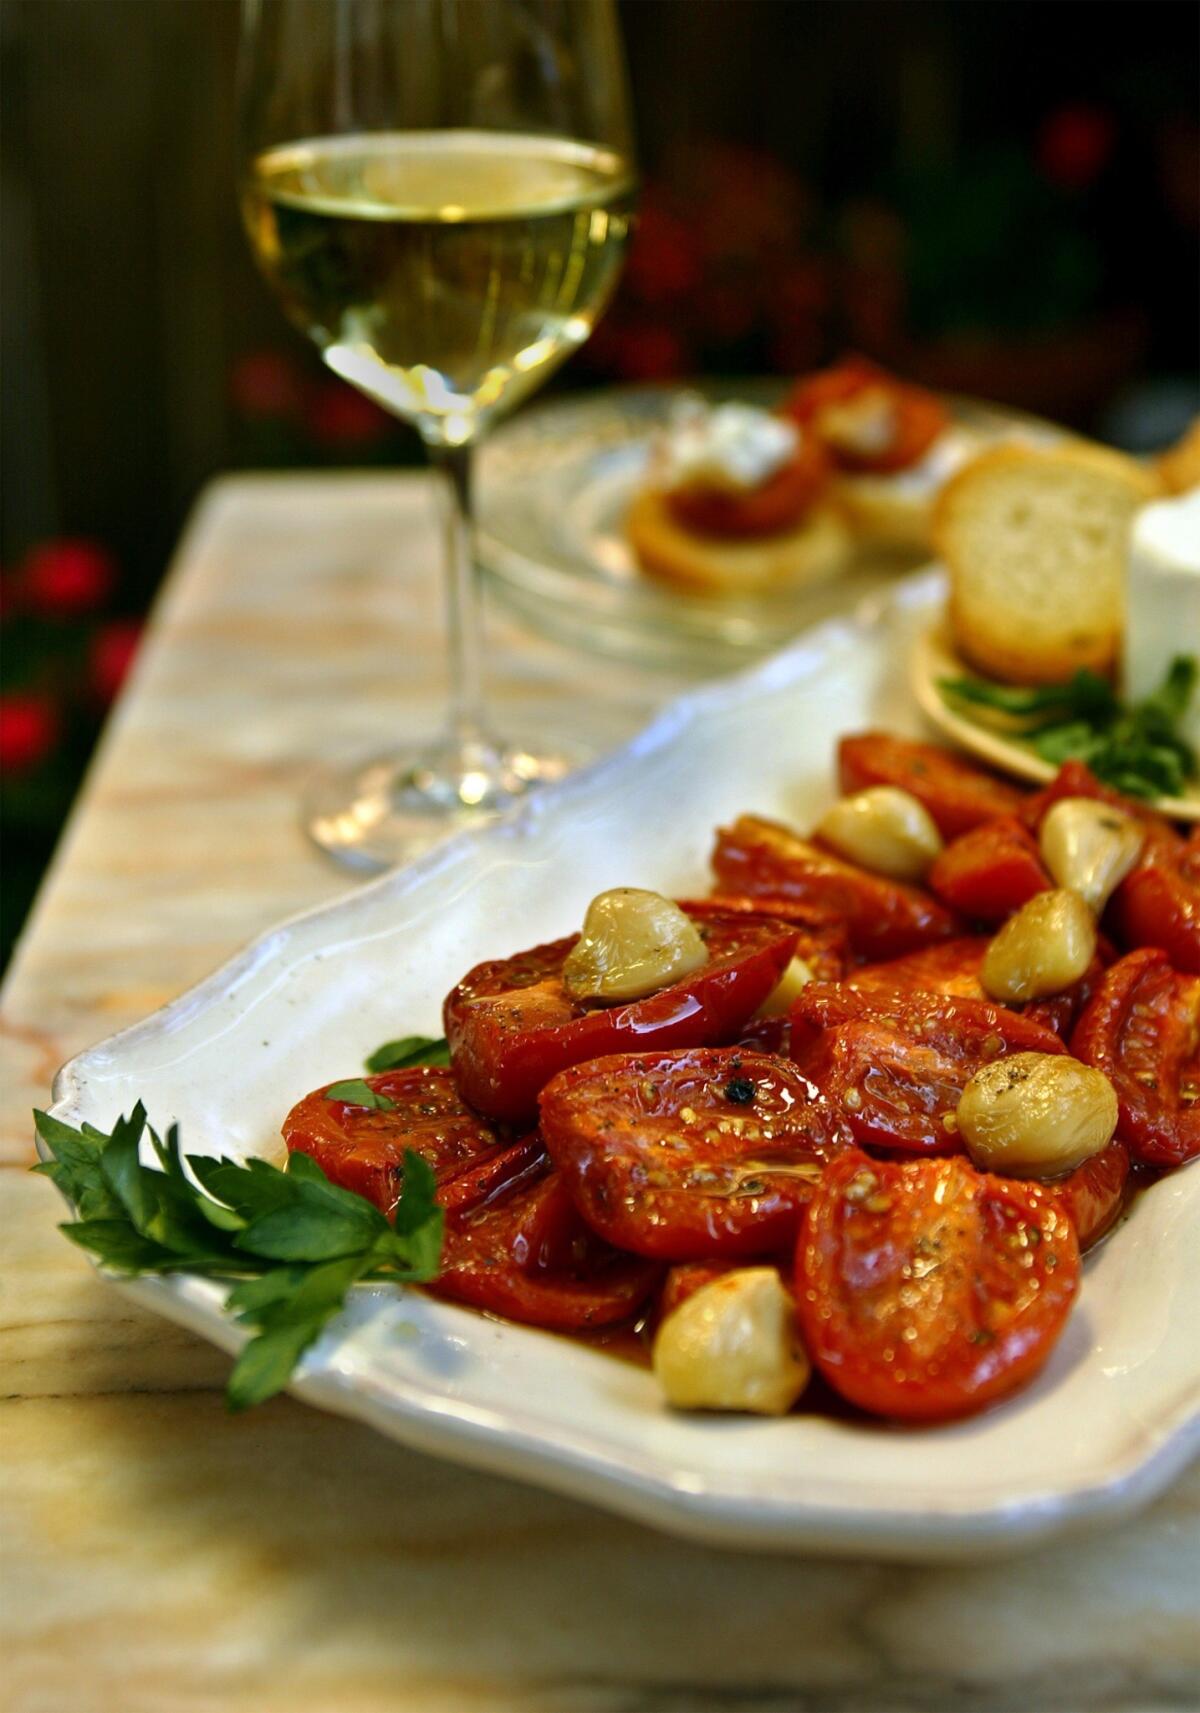 Recipe: Crostini with roasted tomatoes and goat cheese.